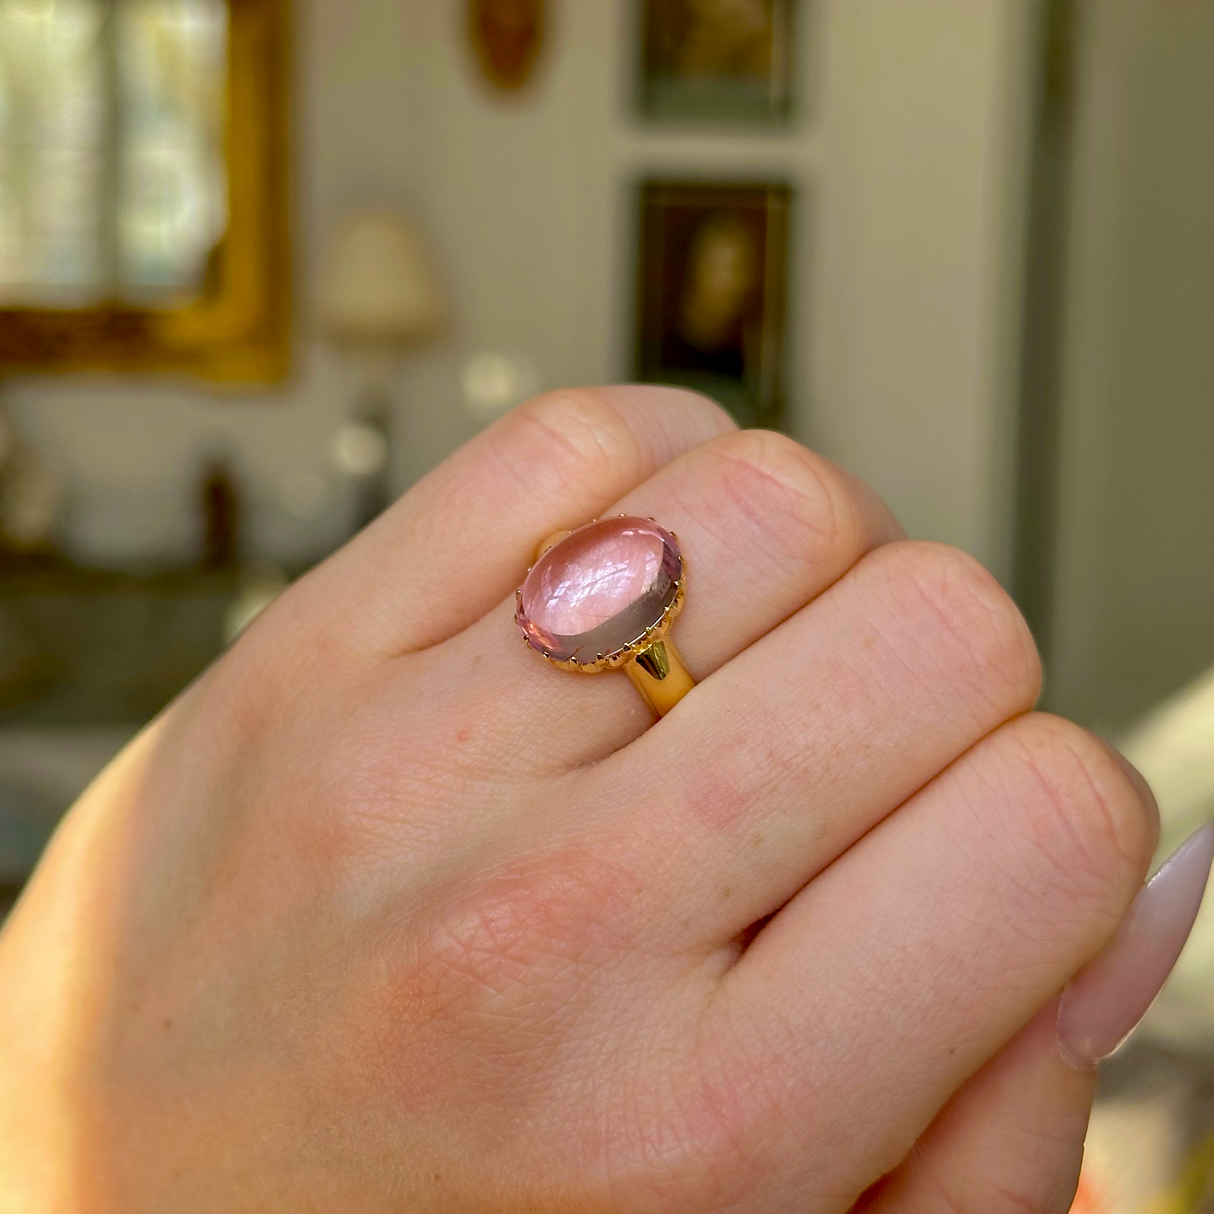 Vintage, Pale Pink Cabochon Topaz Ring, 18ct Yellow Gold worn on closed hand.